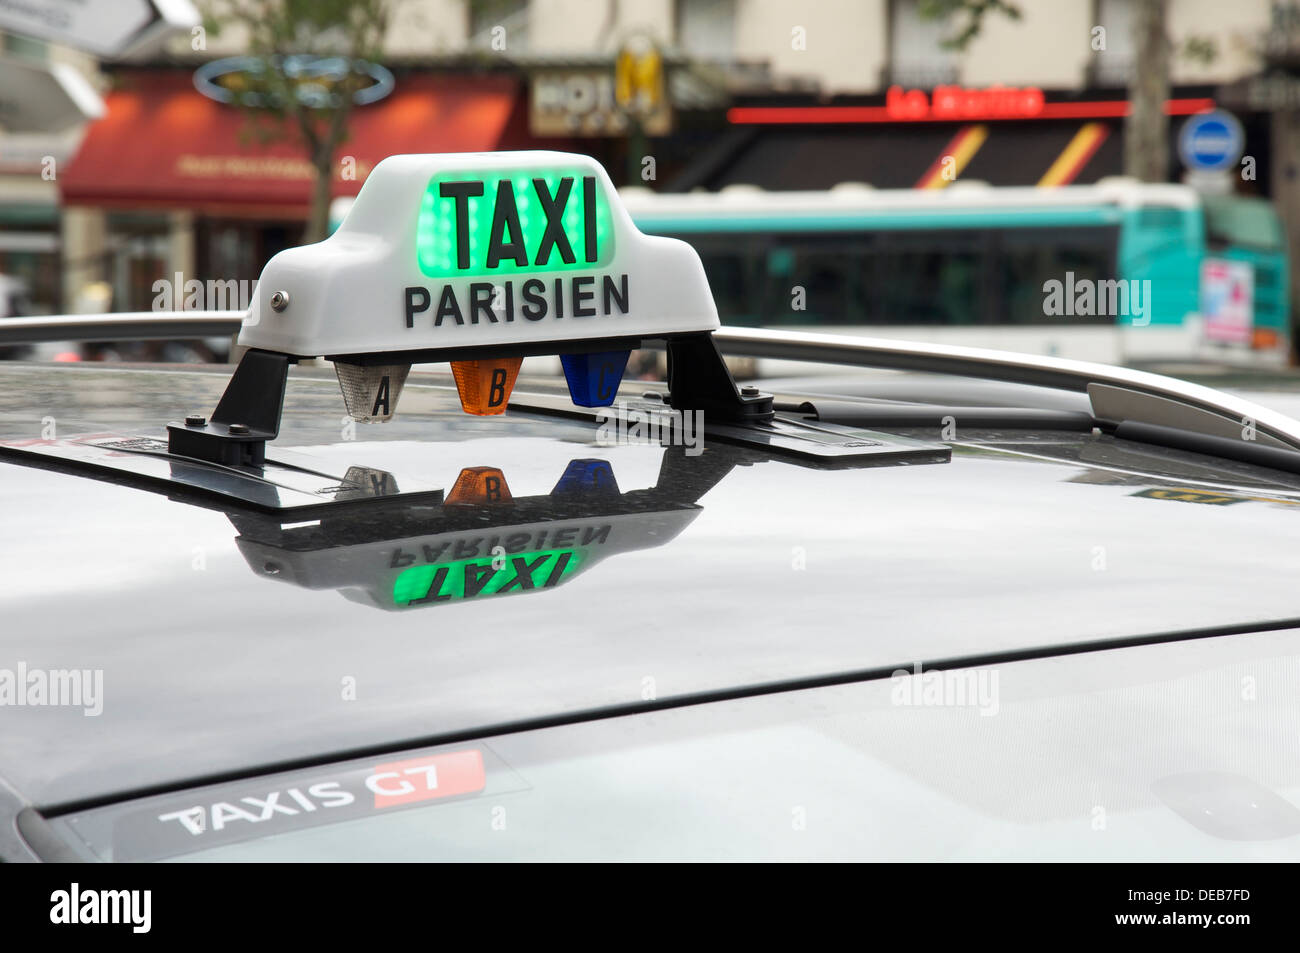 French public transport. The illuminated roof sign of a Parisian taxi cab, waiting for its next fare. Paris, France. Stock Photo